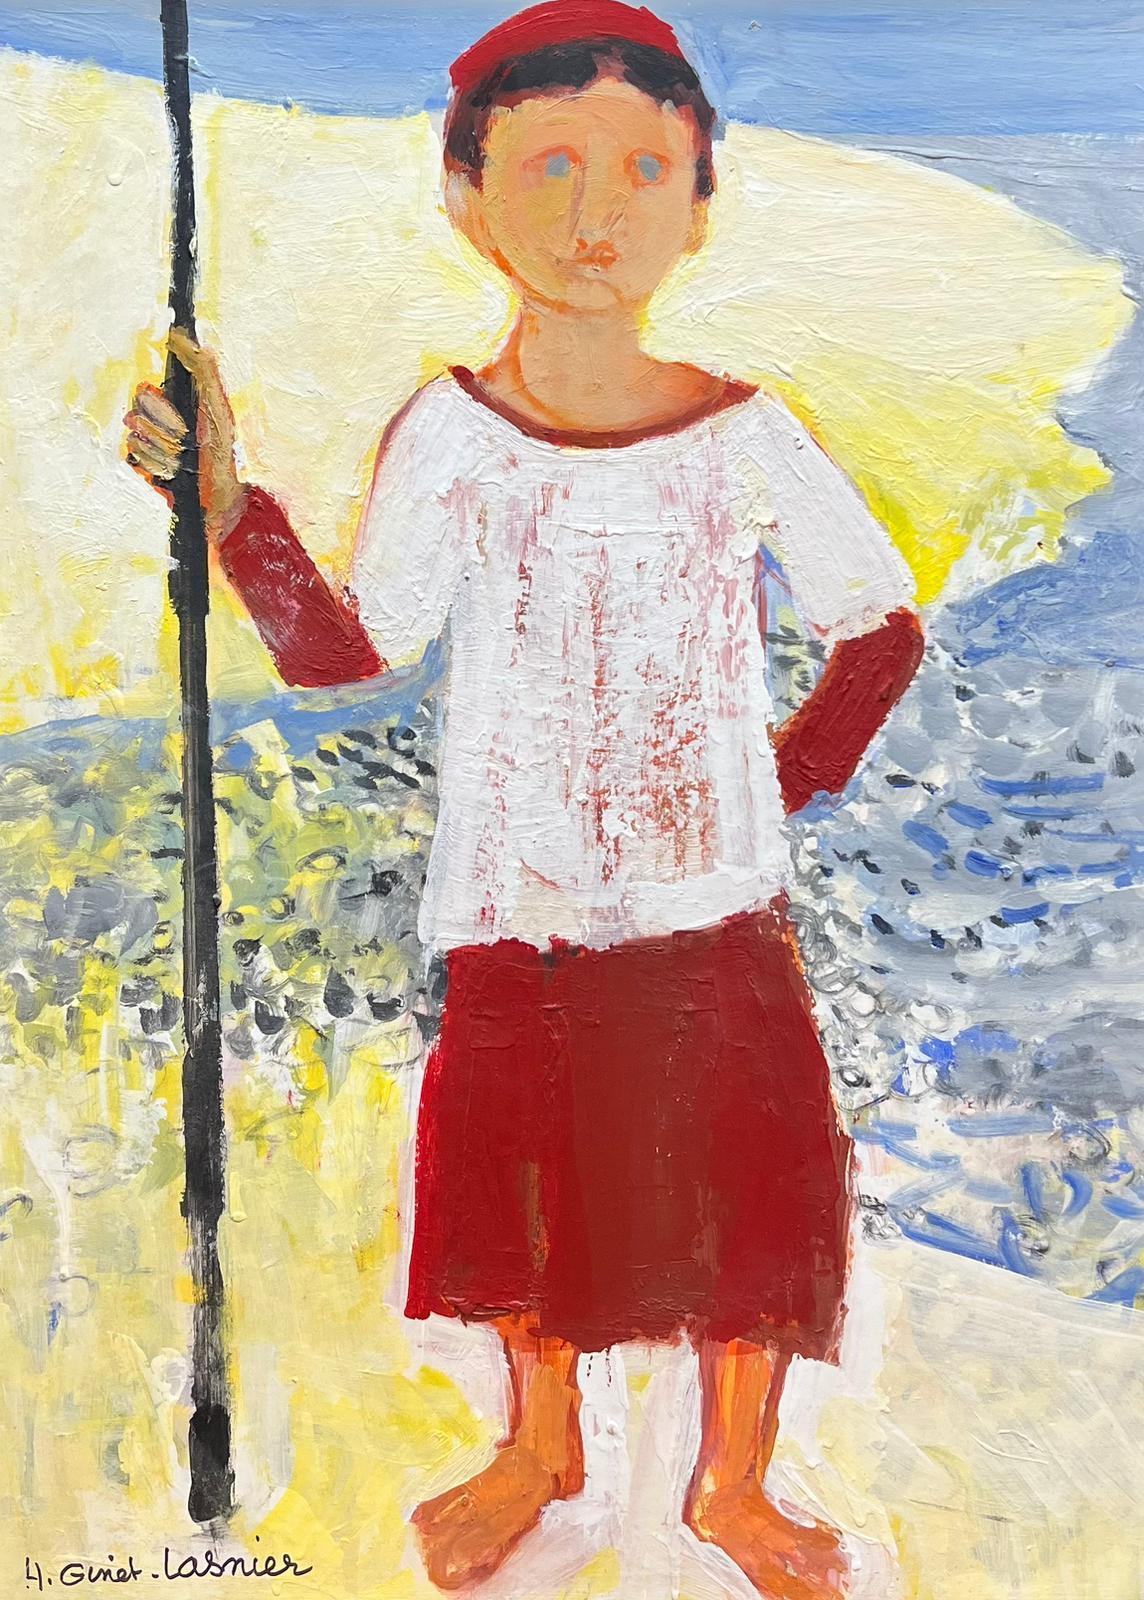 Huguette Ginet-Lasnier  Figurative Painting - Fishing Boy Standing on the Beach French Modernist Signed Huge Painting